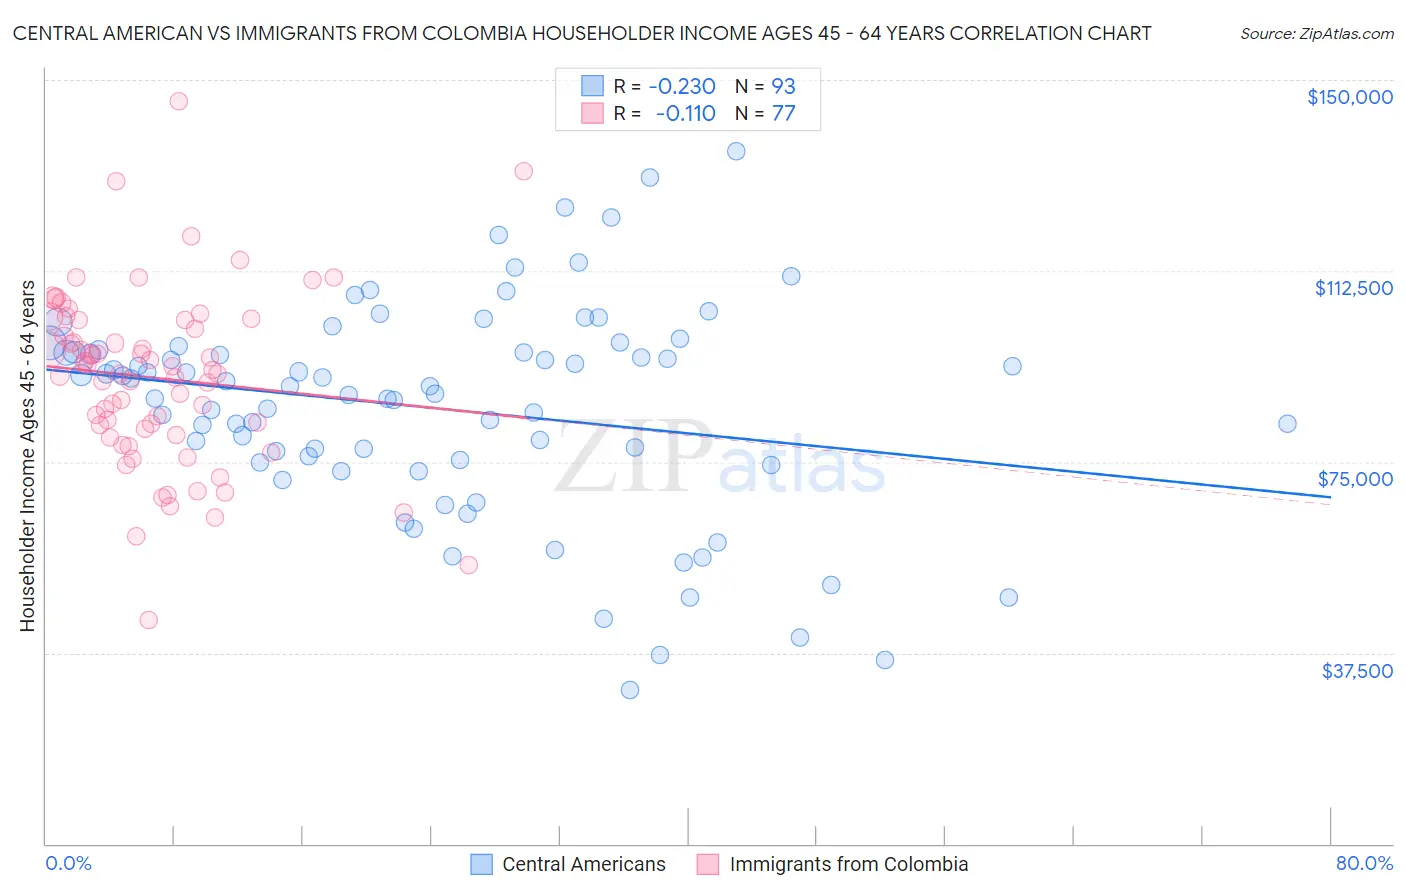 Central American vs Immigrants from Colombia Householder Income Ages 45 - 64 years